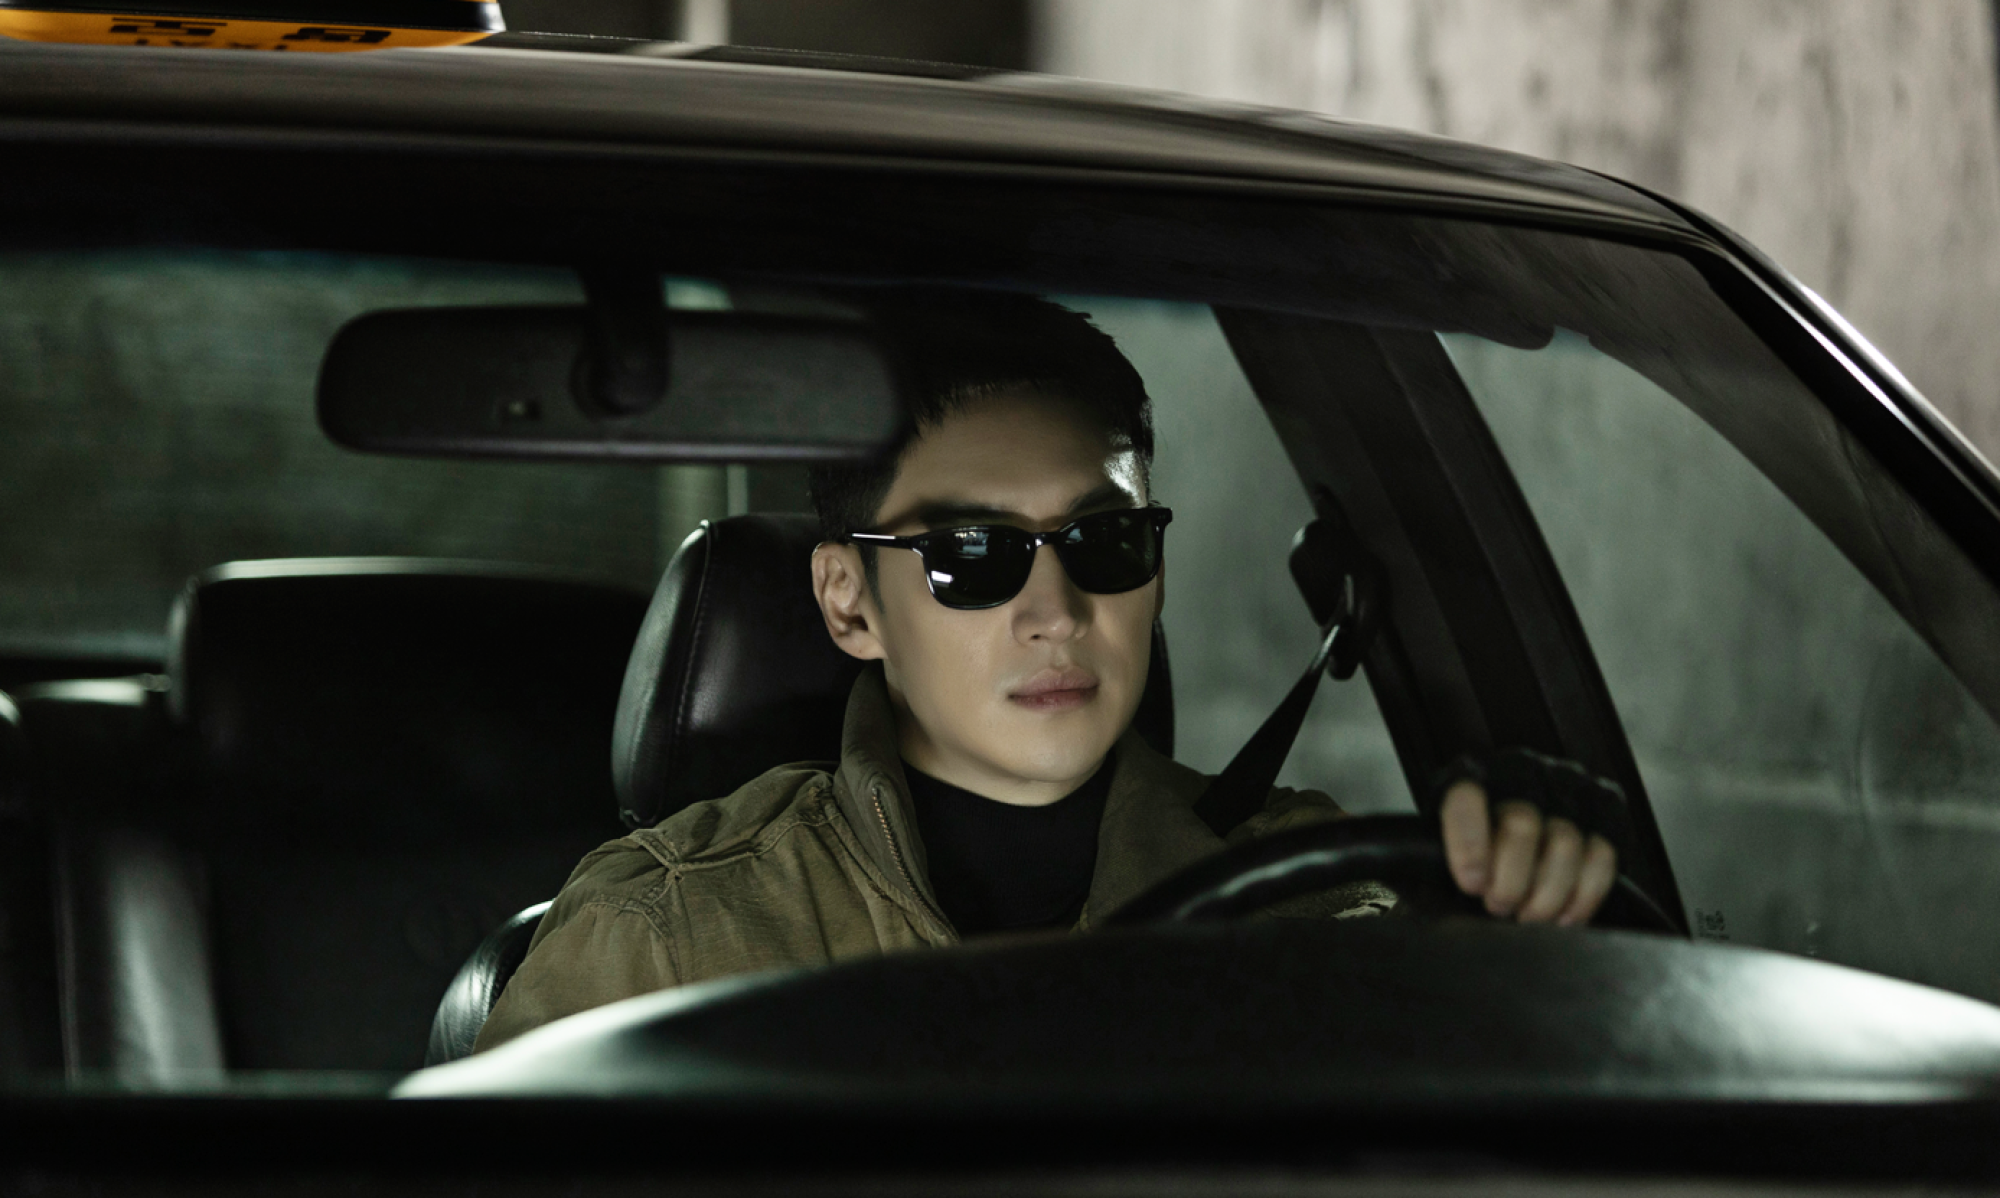 K Drama Taxi Driver: Styled Like Ryan Gosling In Drive, Lee Je Hoon Plays A Vengeful Cabbie. South China Morning Post